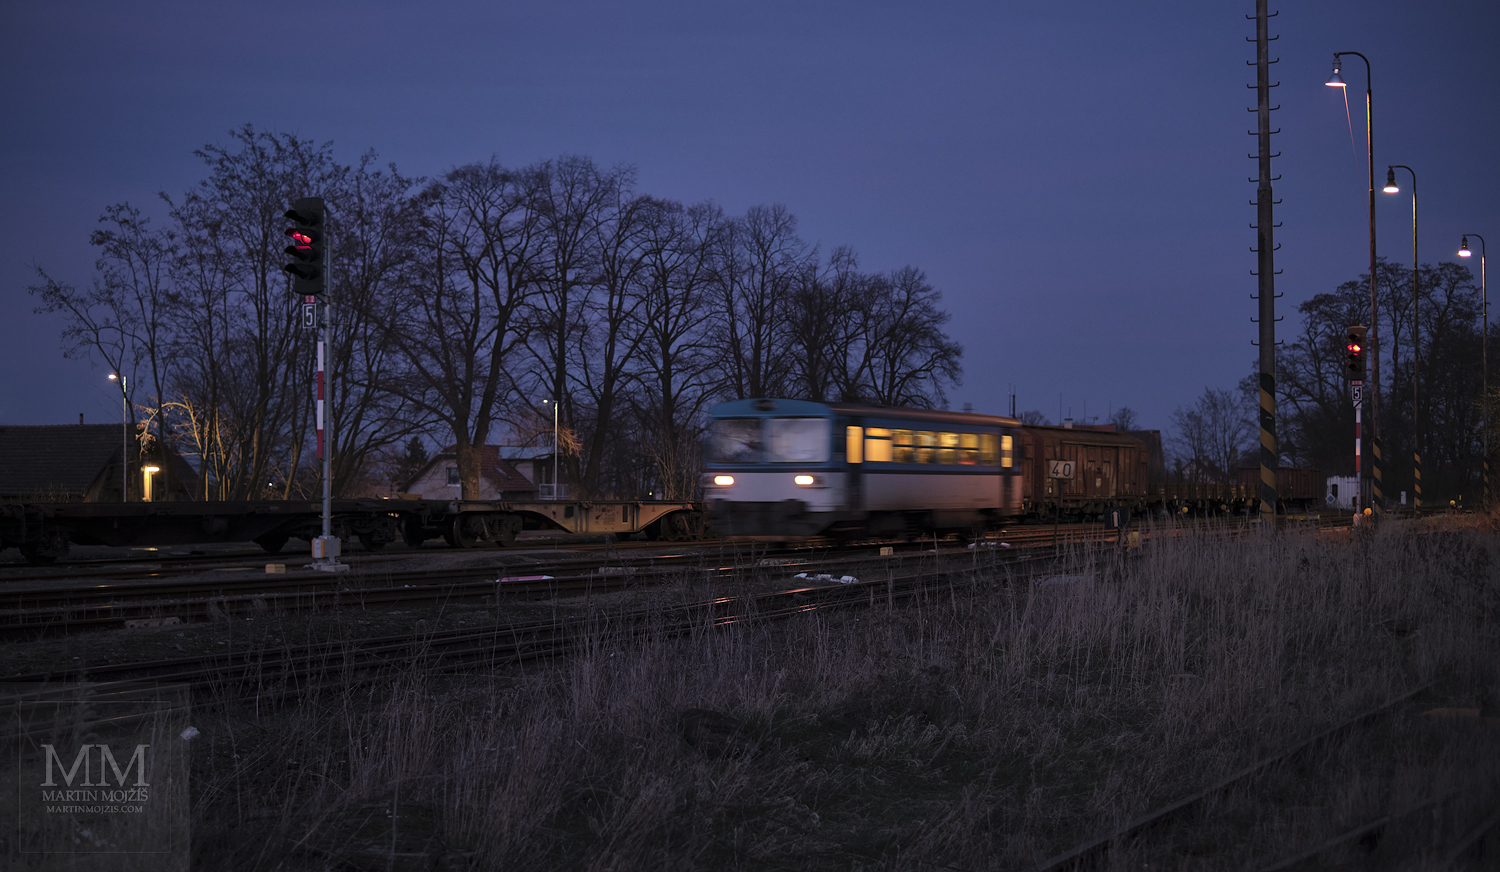 Fine Art large format photograph of the engine train arriving early evening railway station. Martin Mojzis.